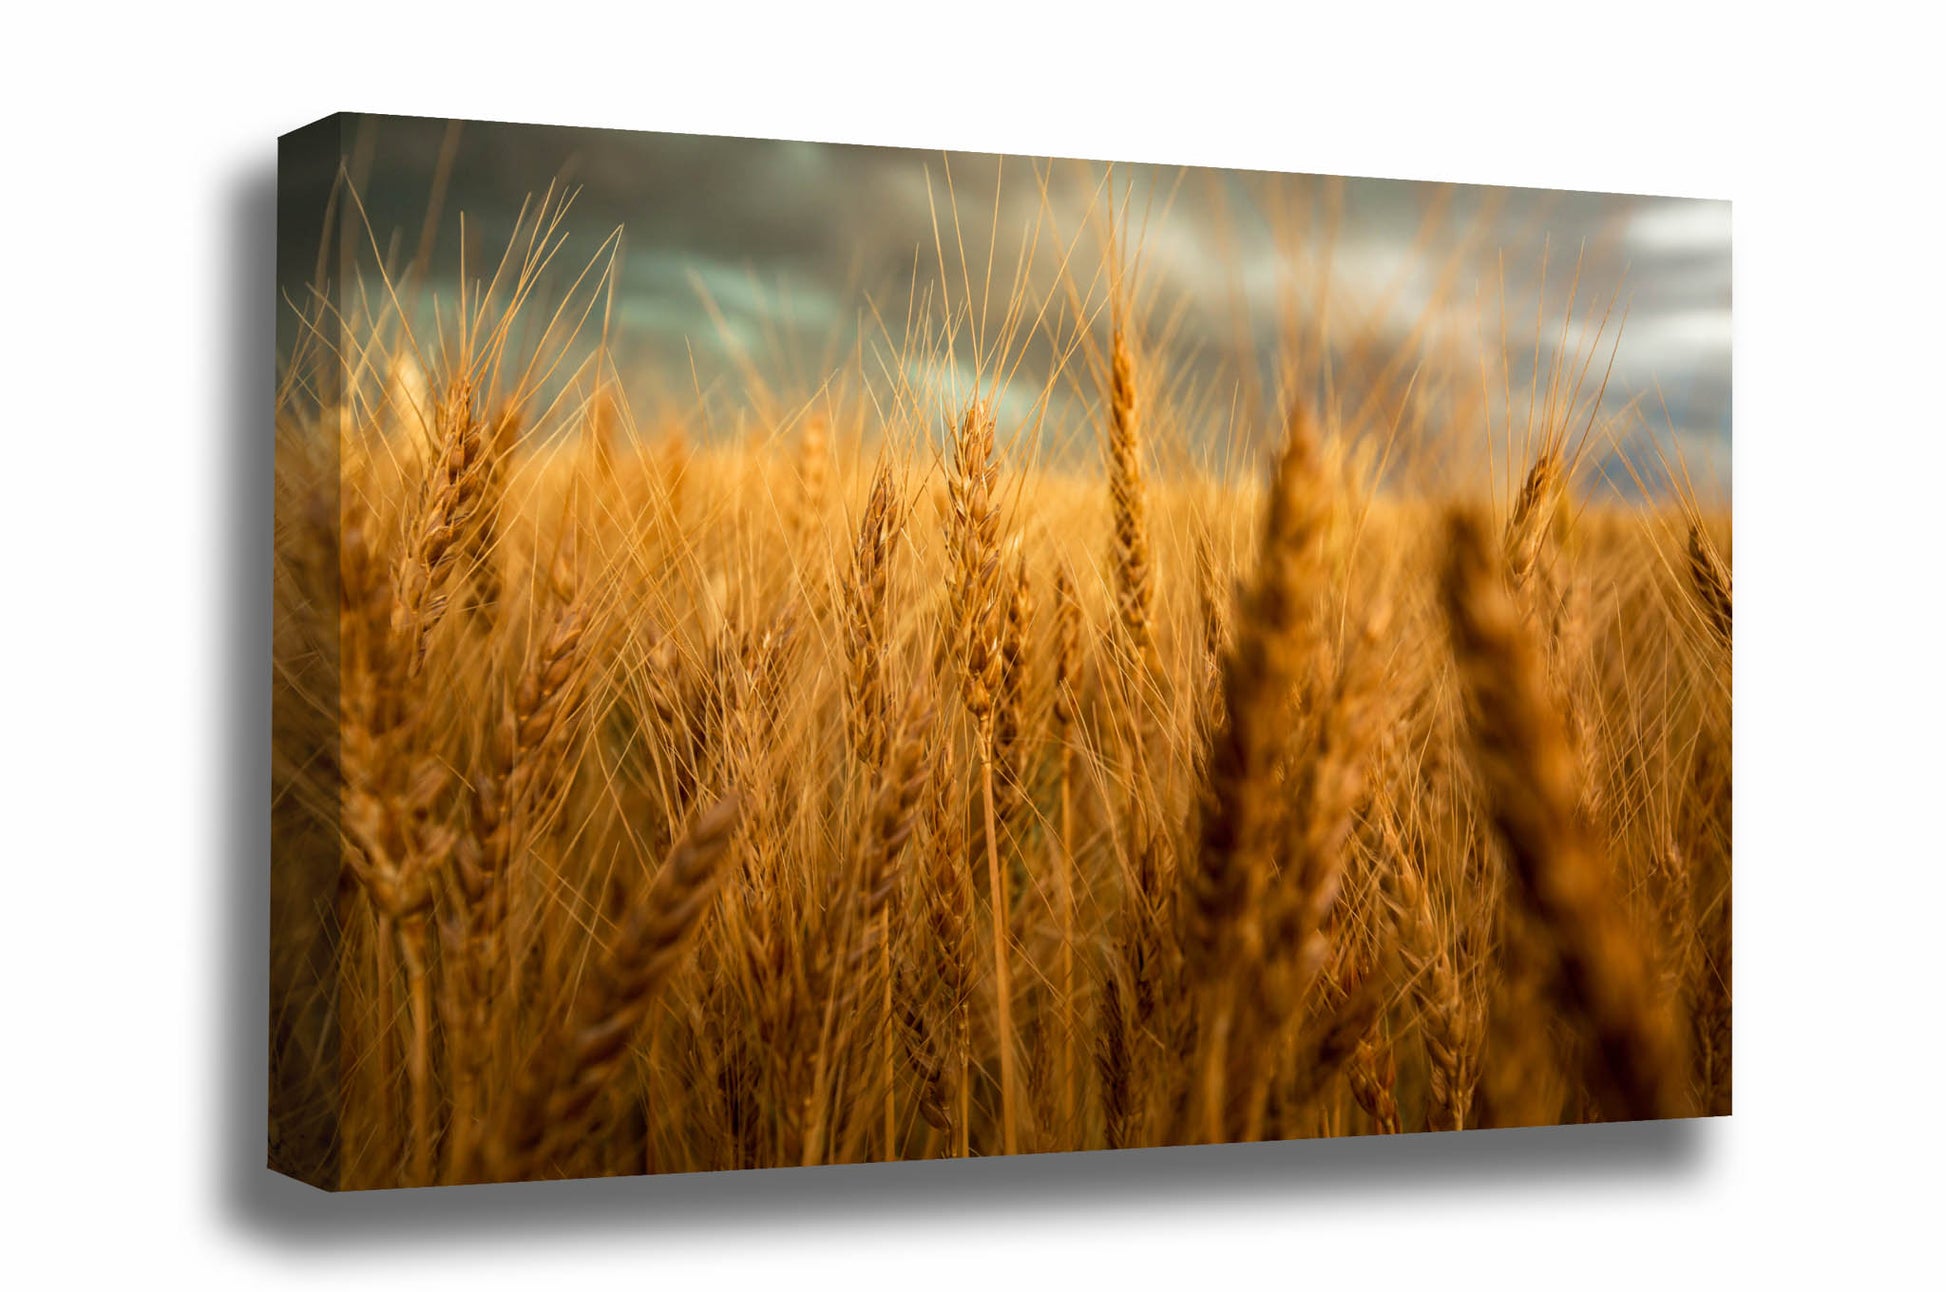 Farm canvas wall art of golden wheat stalks ready to harvest on a late spring day in Colorado by Sean Ramsey of Southern Plains Photography.